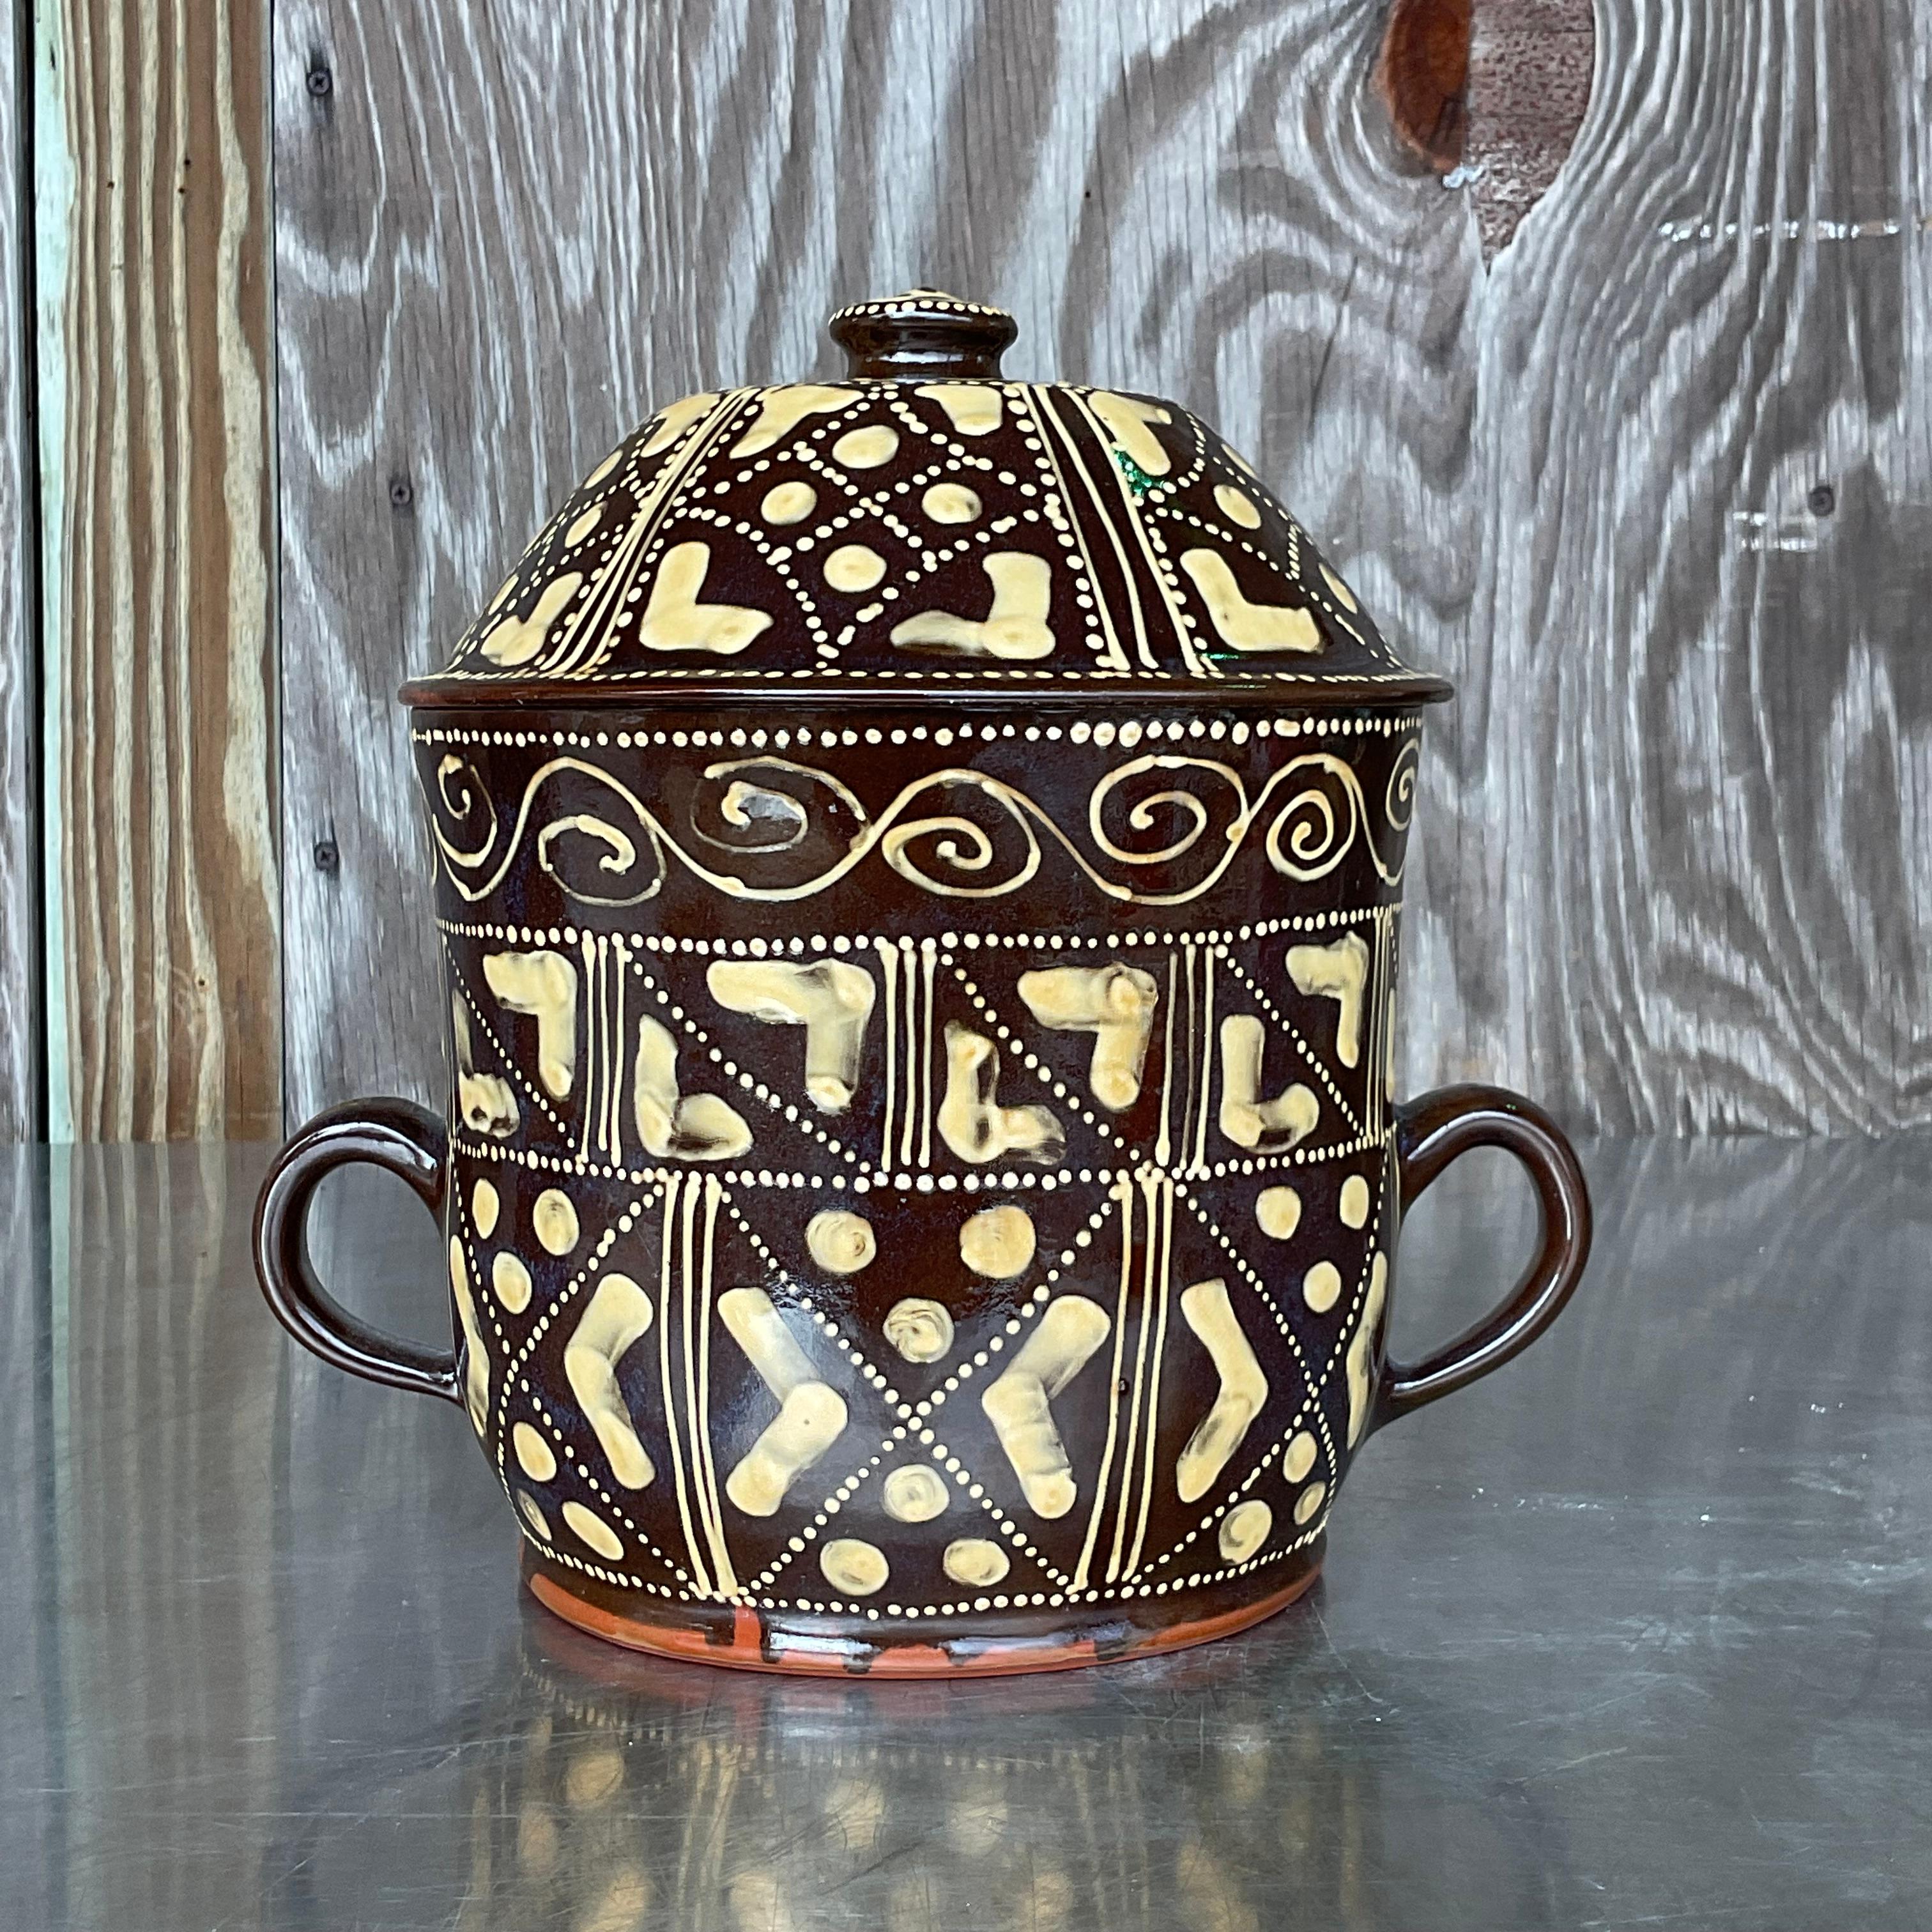 Add a touch of whimsy to your tea time with our Vintage Boho Hand Painted Ceramic Chocolate Pot. Crafted with artistic flair and infused with Bohemian charm, this exquisite piece brings a splash of color and personality to your table. Embrace the